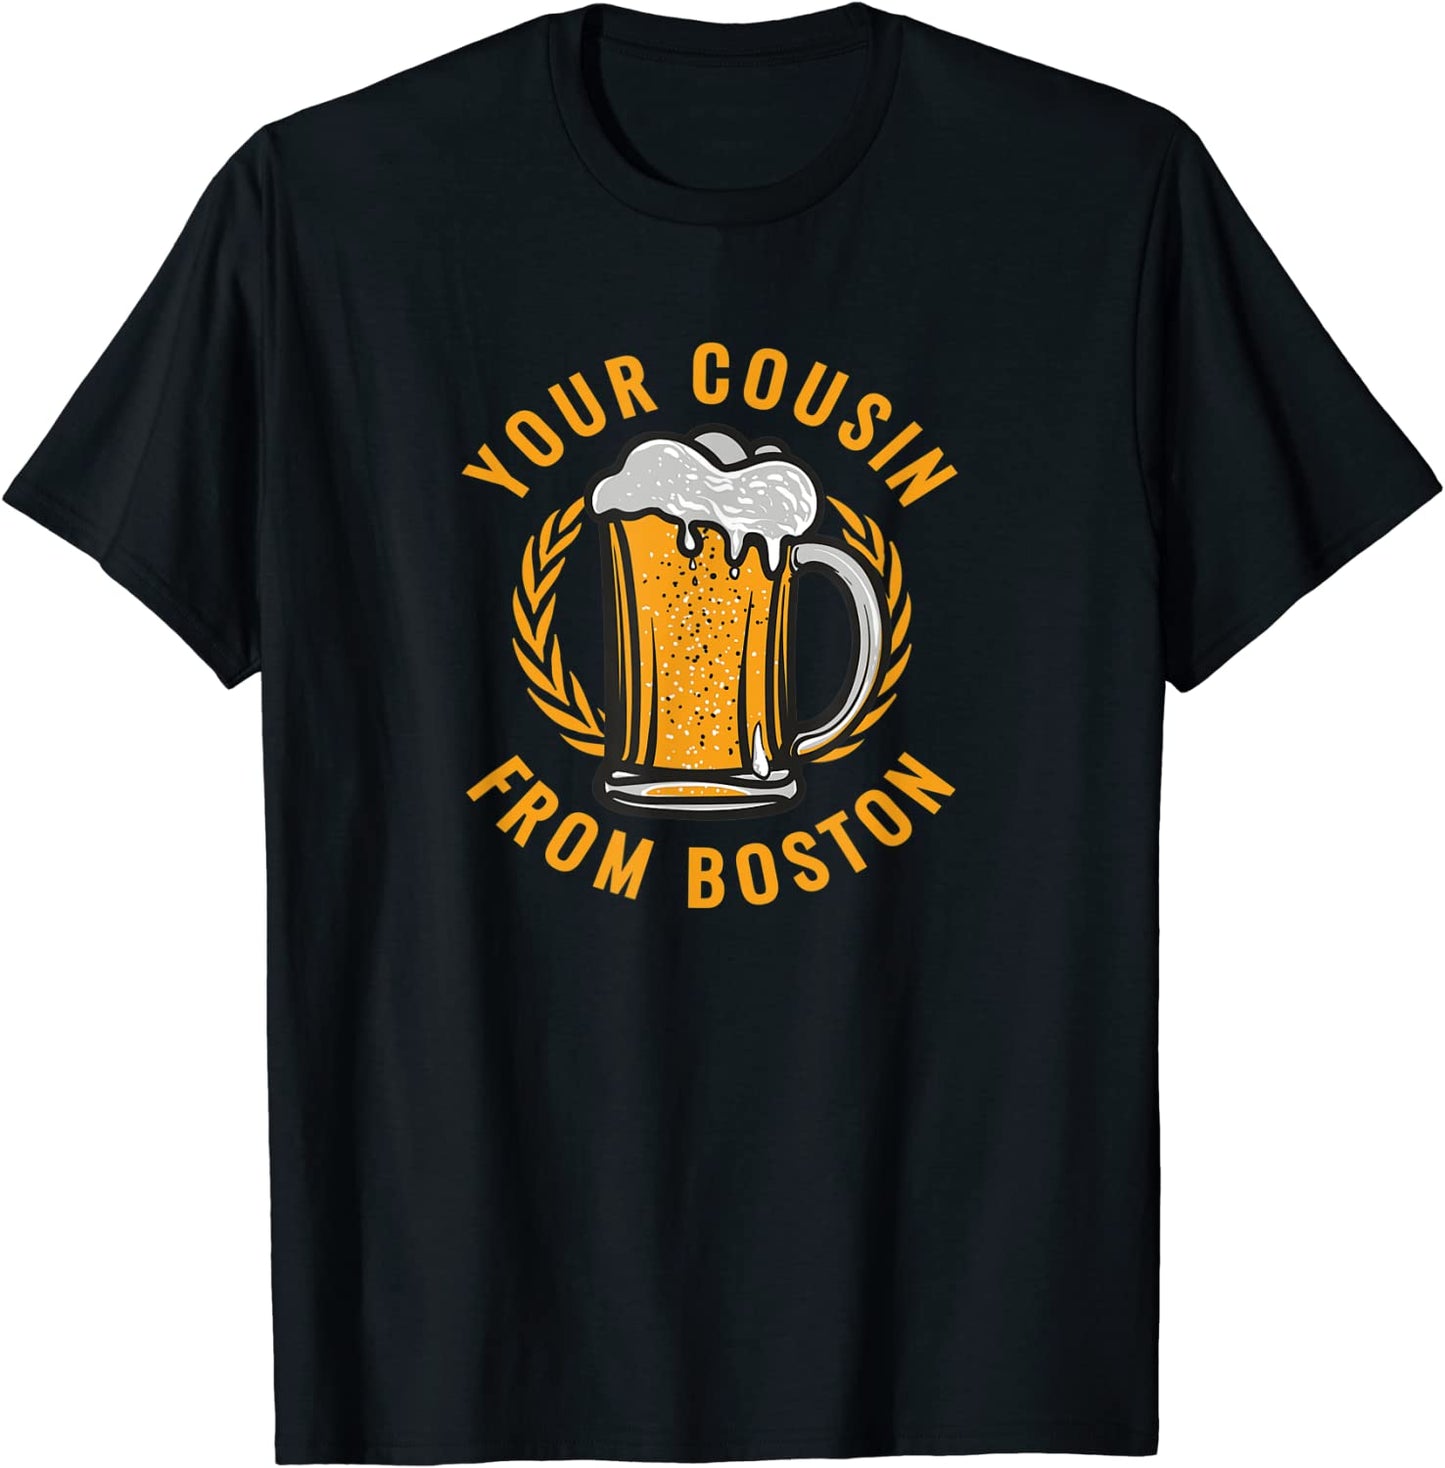 Your Cousin From Boston T-Shirt